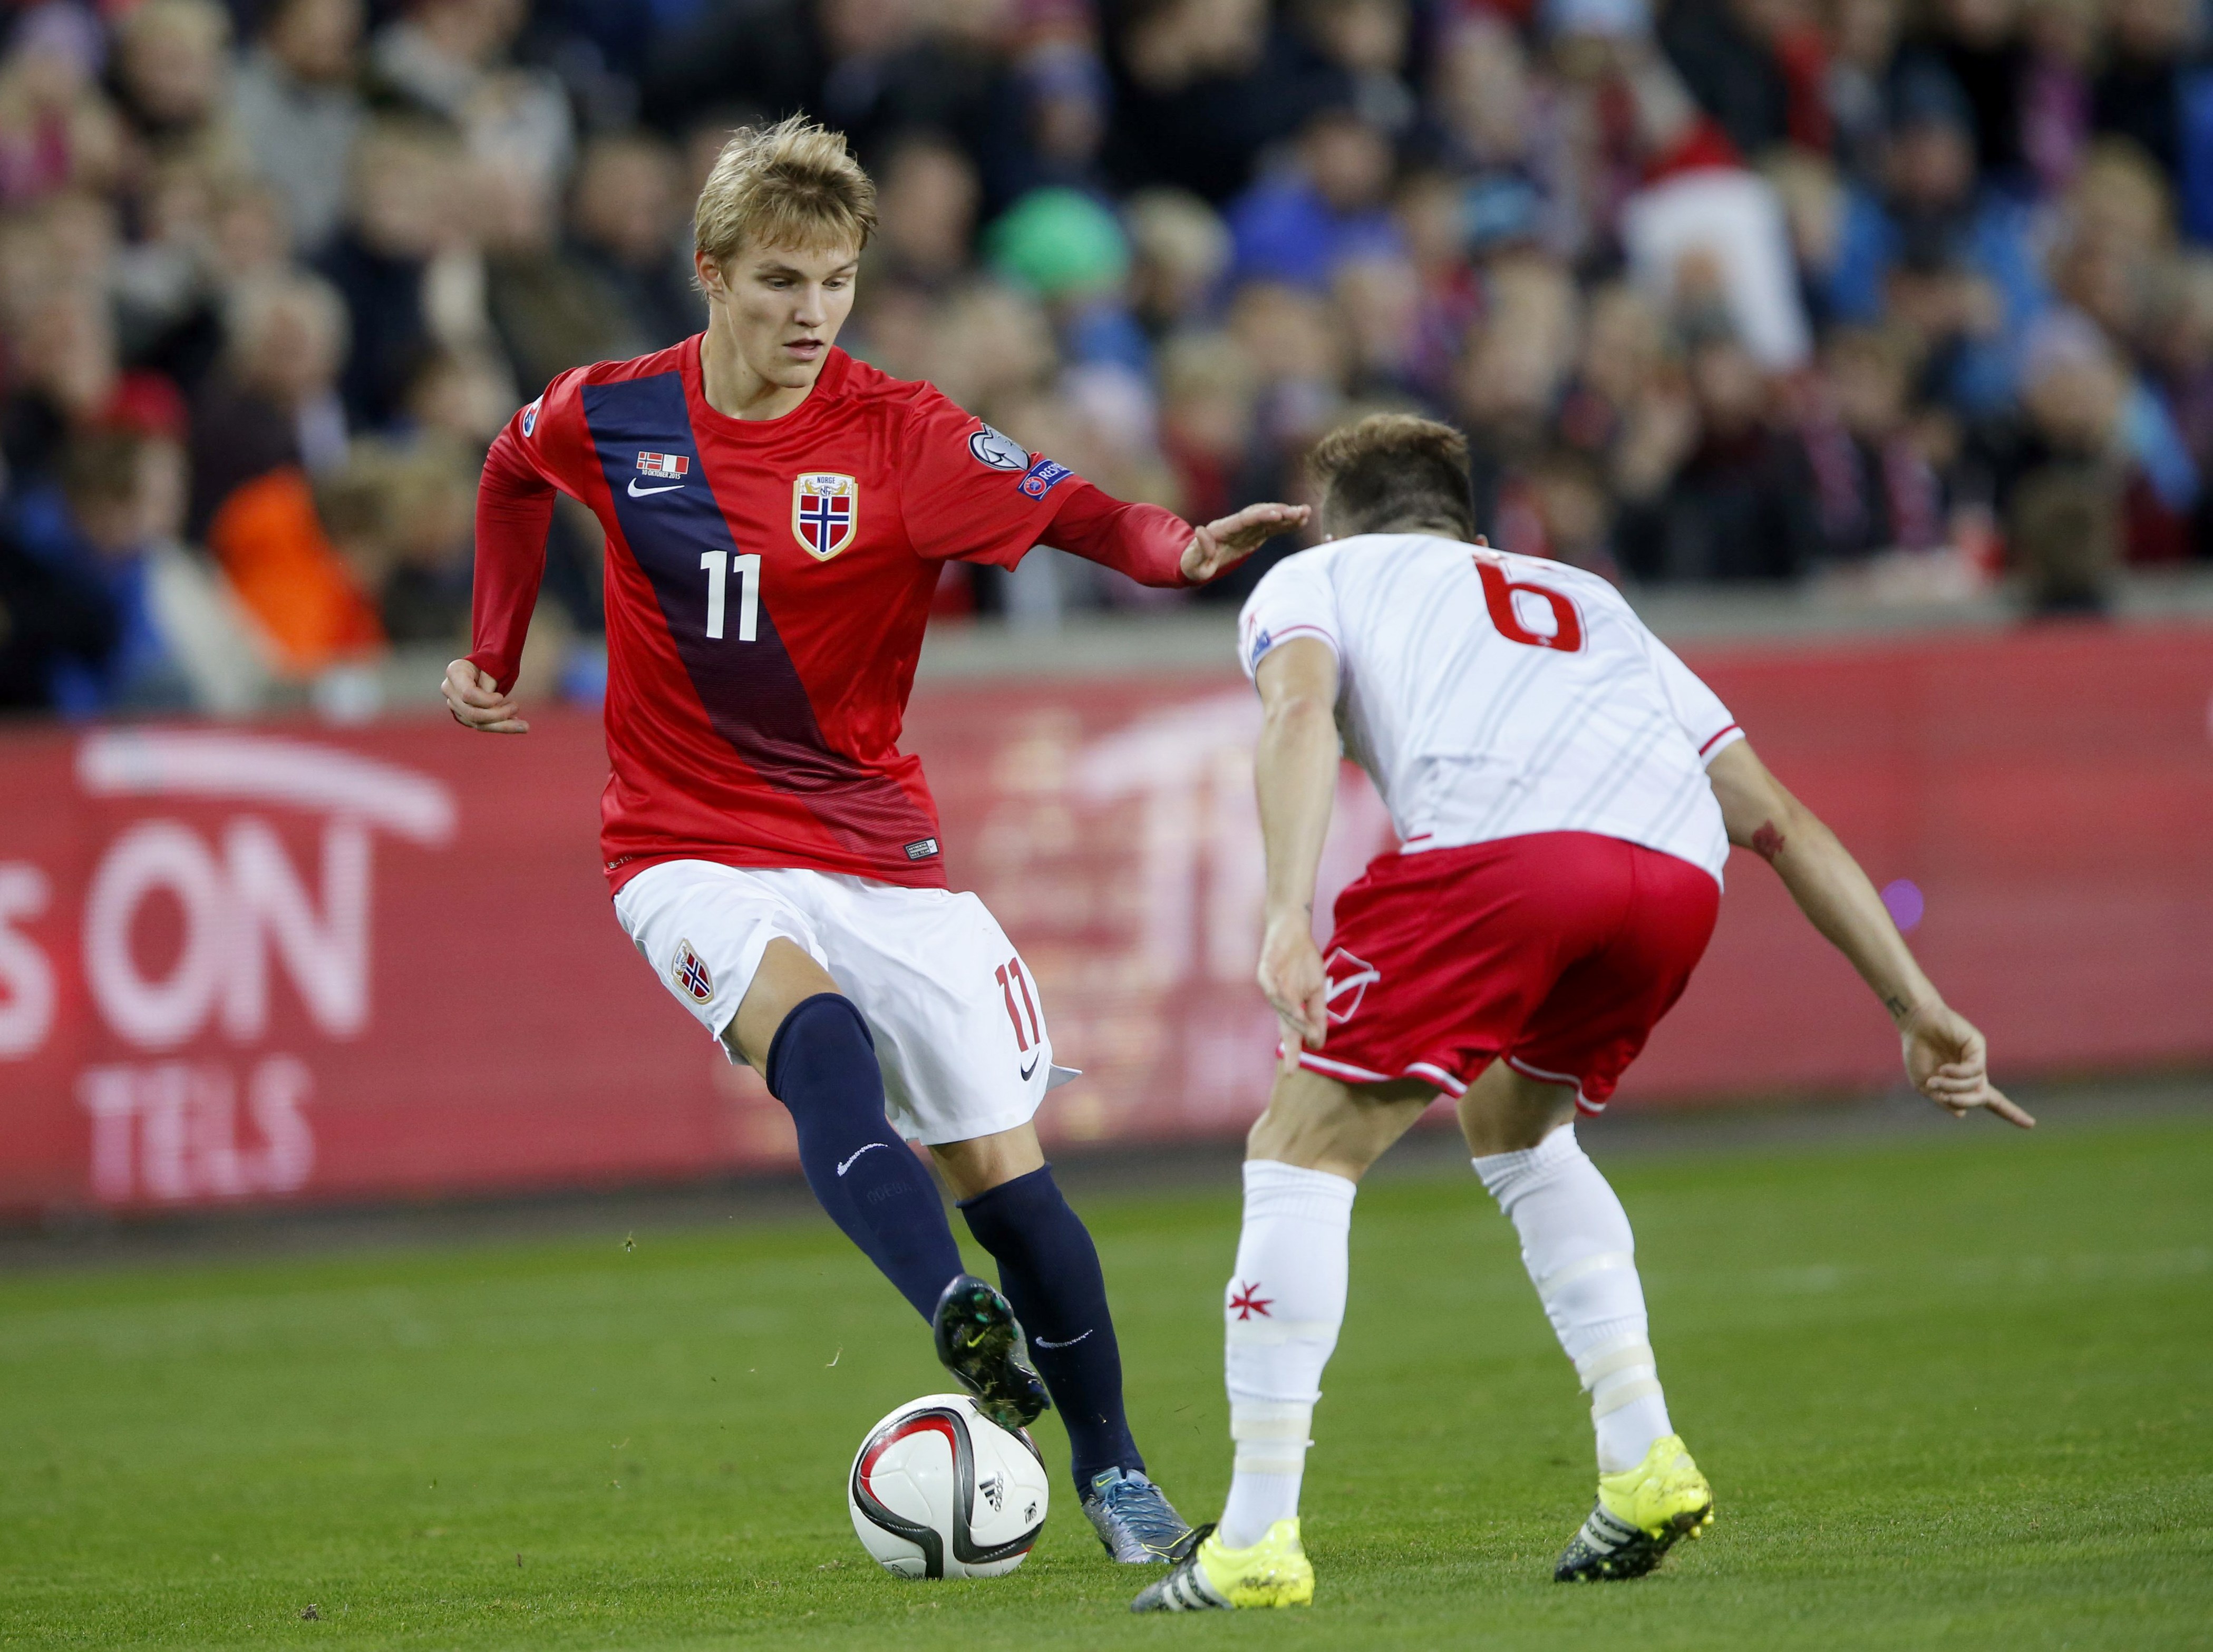 Norway vs Spain Preview: Probable Lineups, Prediction, Tactics, Team News & Key Stats. 